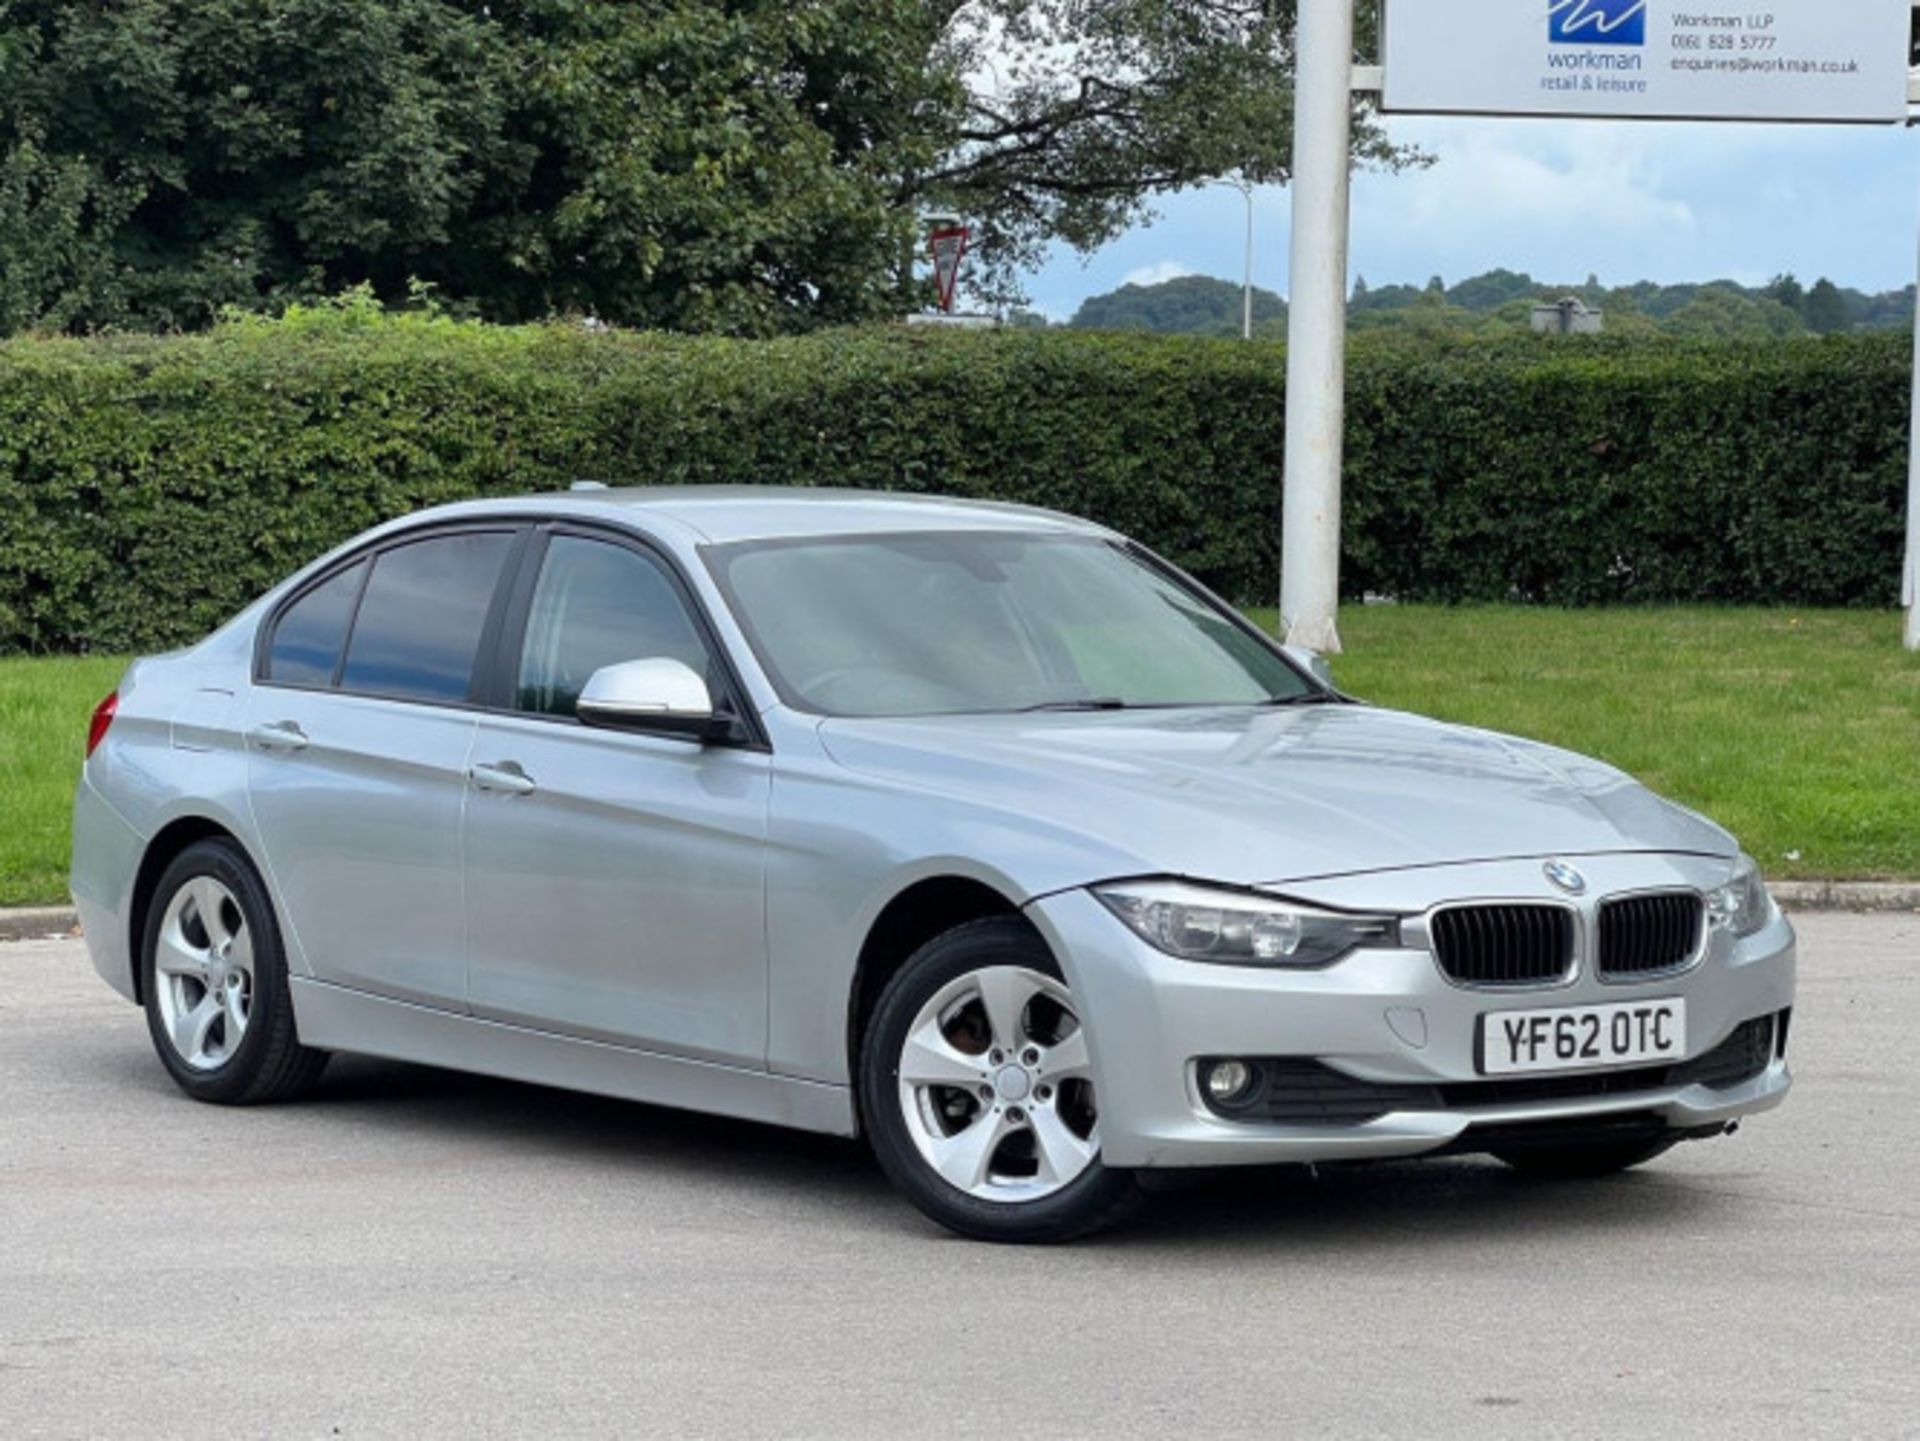 BMW 3 SERIES 2.0 DIESEL ED START STOP - A WELL-MAINTAINED GEM >>--NO VAT ON HAMMER--<< - Image 4 of 229